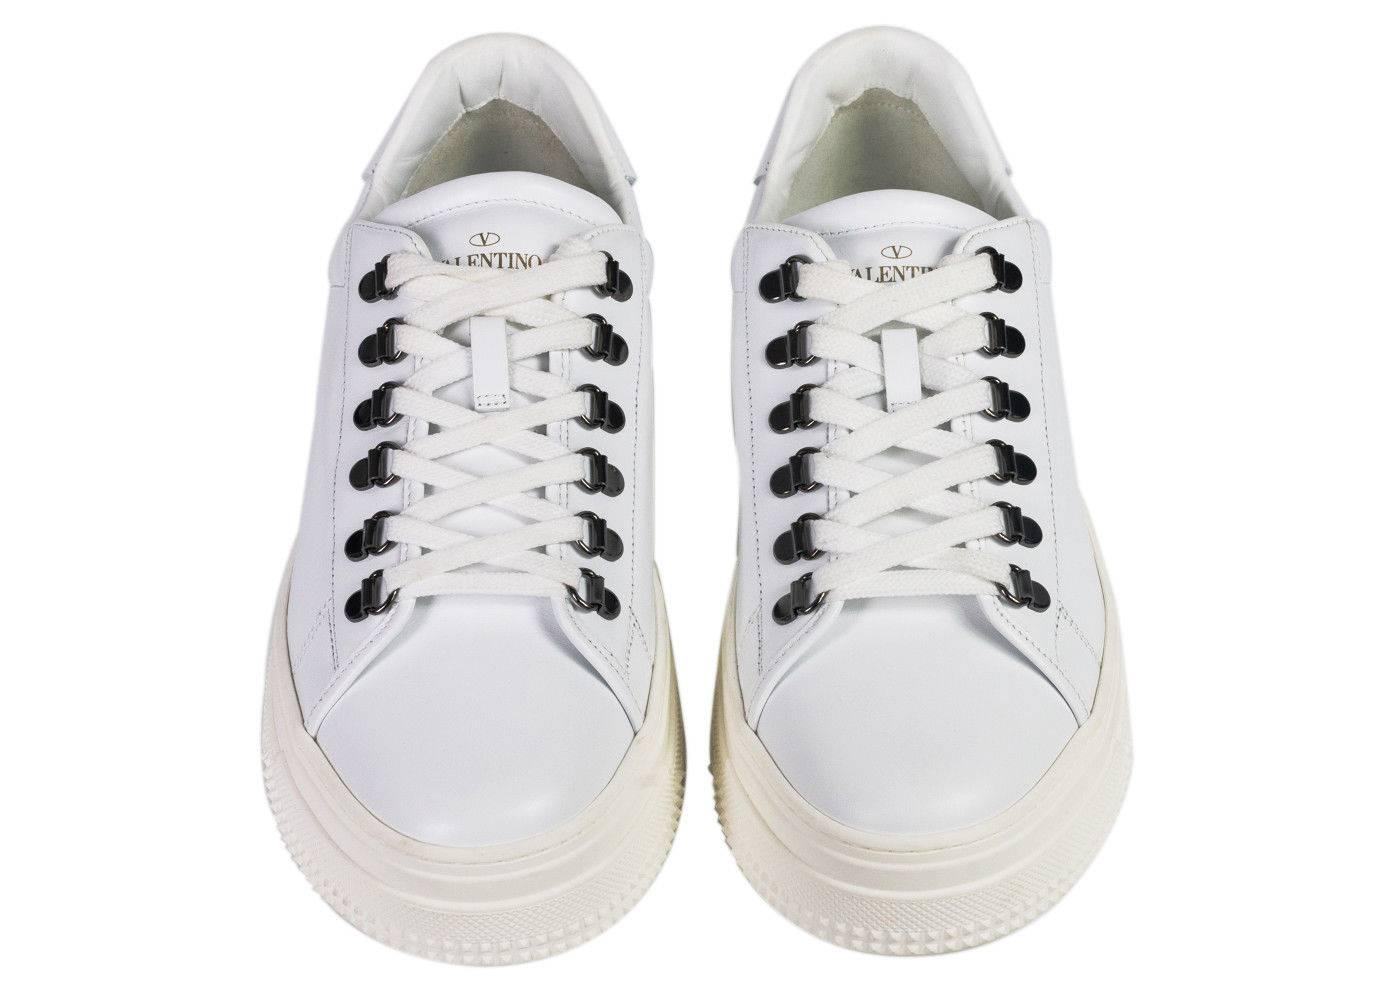 Brand New Valentino Lace Up Platform Sneakers
Original Tags and Dust Bag Included
Retails in Stores & Online for $975
Mens Size EUR 42 / US 9 Fits True to Size


The Valentino Lace-Up Platform sneakers are the new modern. This shoe features a